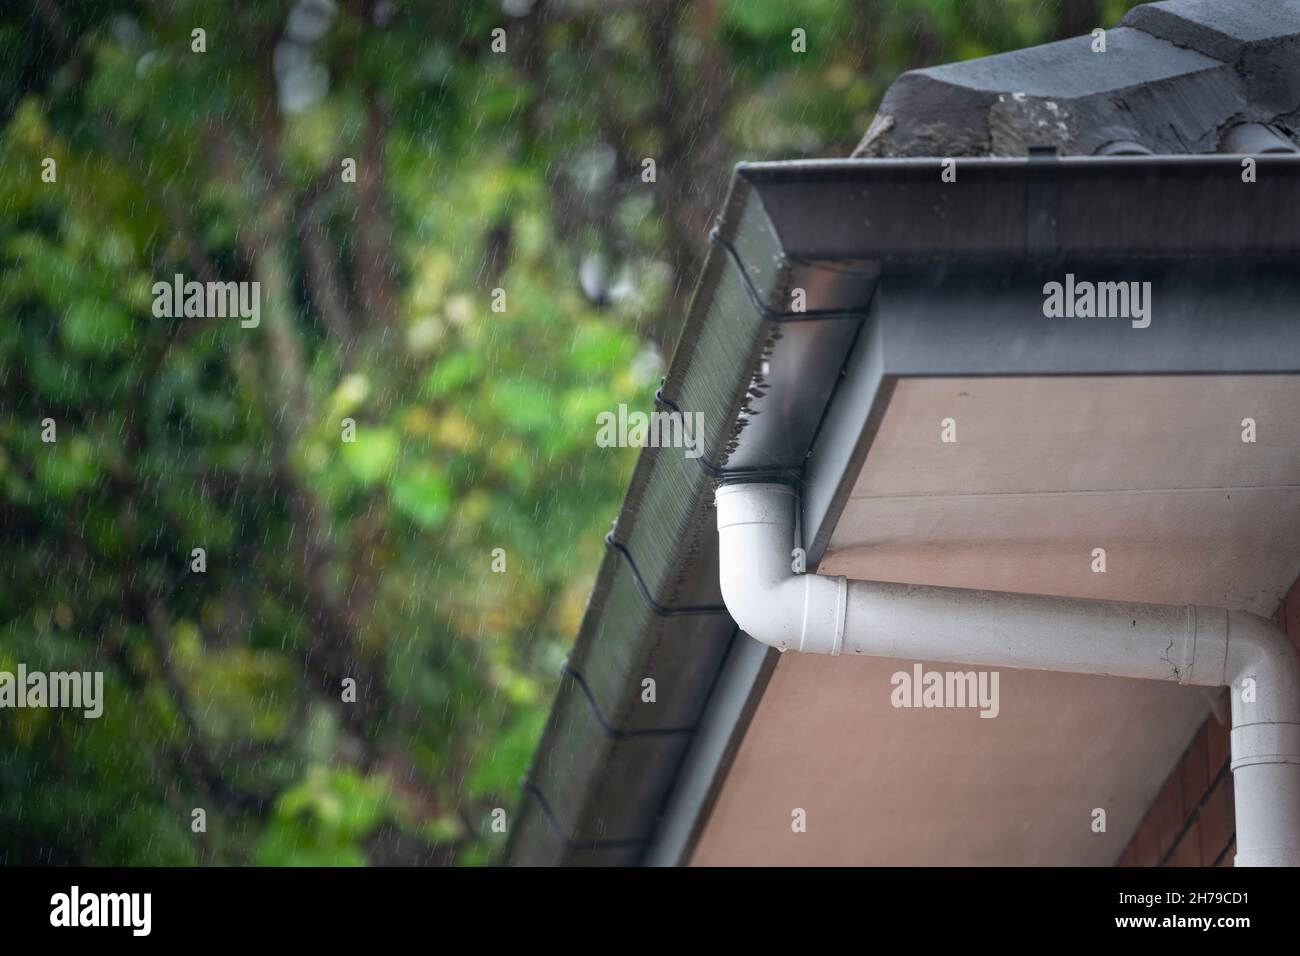 Roof gutter and downpipes in the rain with visible raindrops Stock Photo